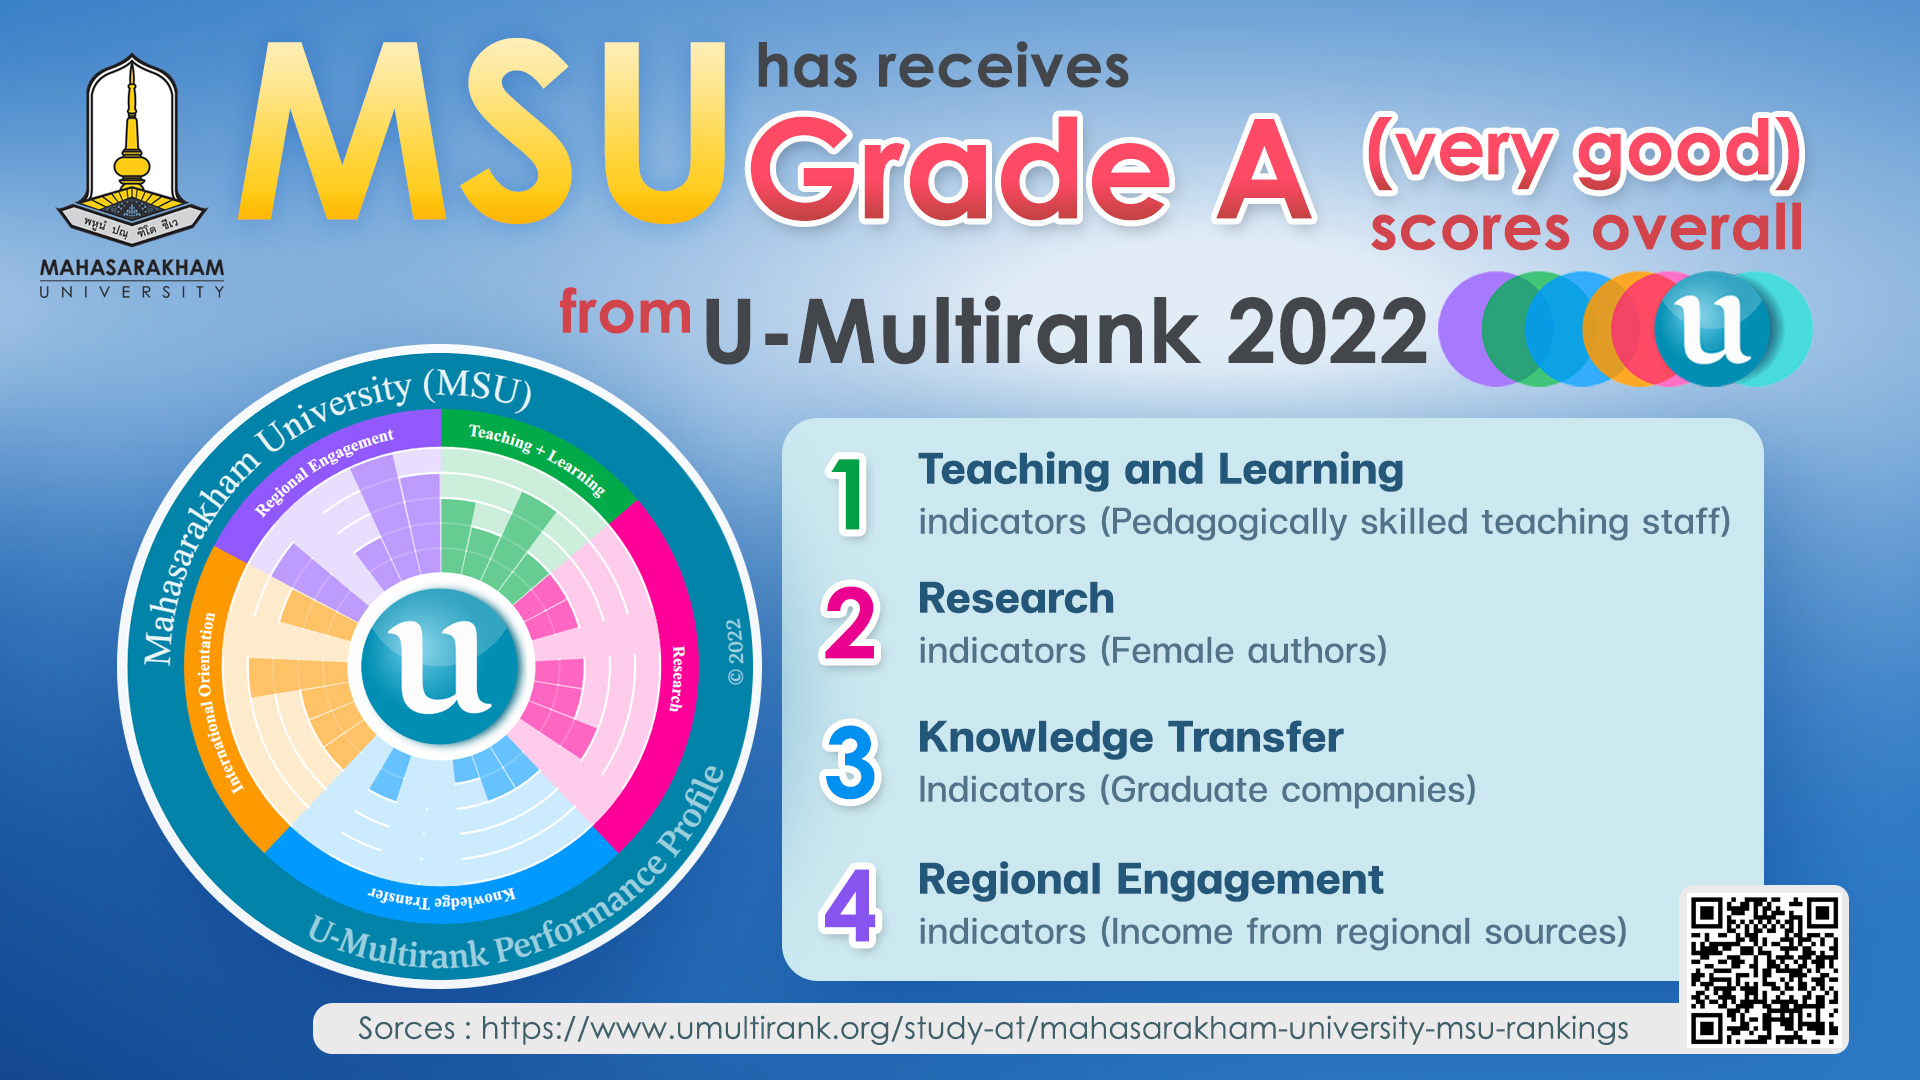 MSU has receives Grade A (very good) scores overall from U-Multirank 2022